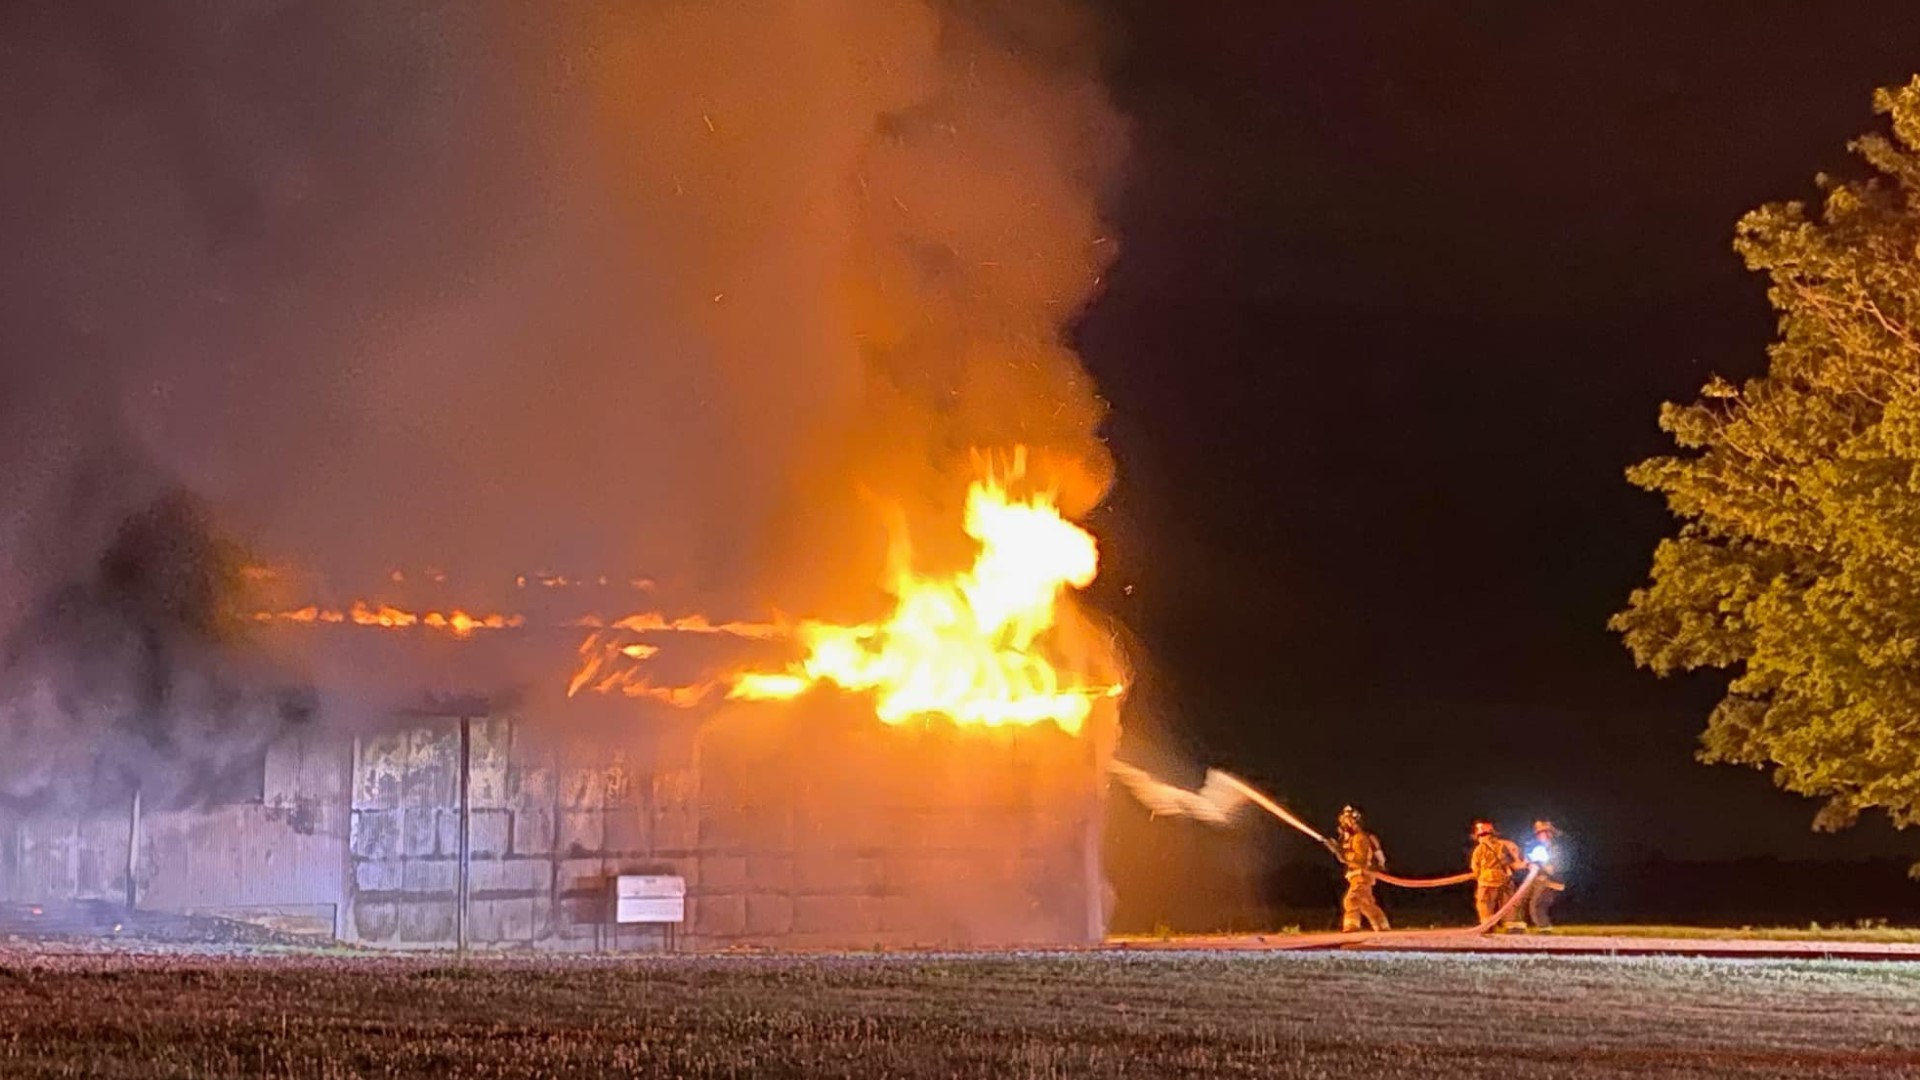 Firefighters extinguished a barn fire in Johnson County that investigators believe was caused by exploded fireworks being set out in the heat.